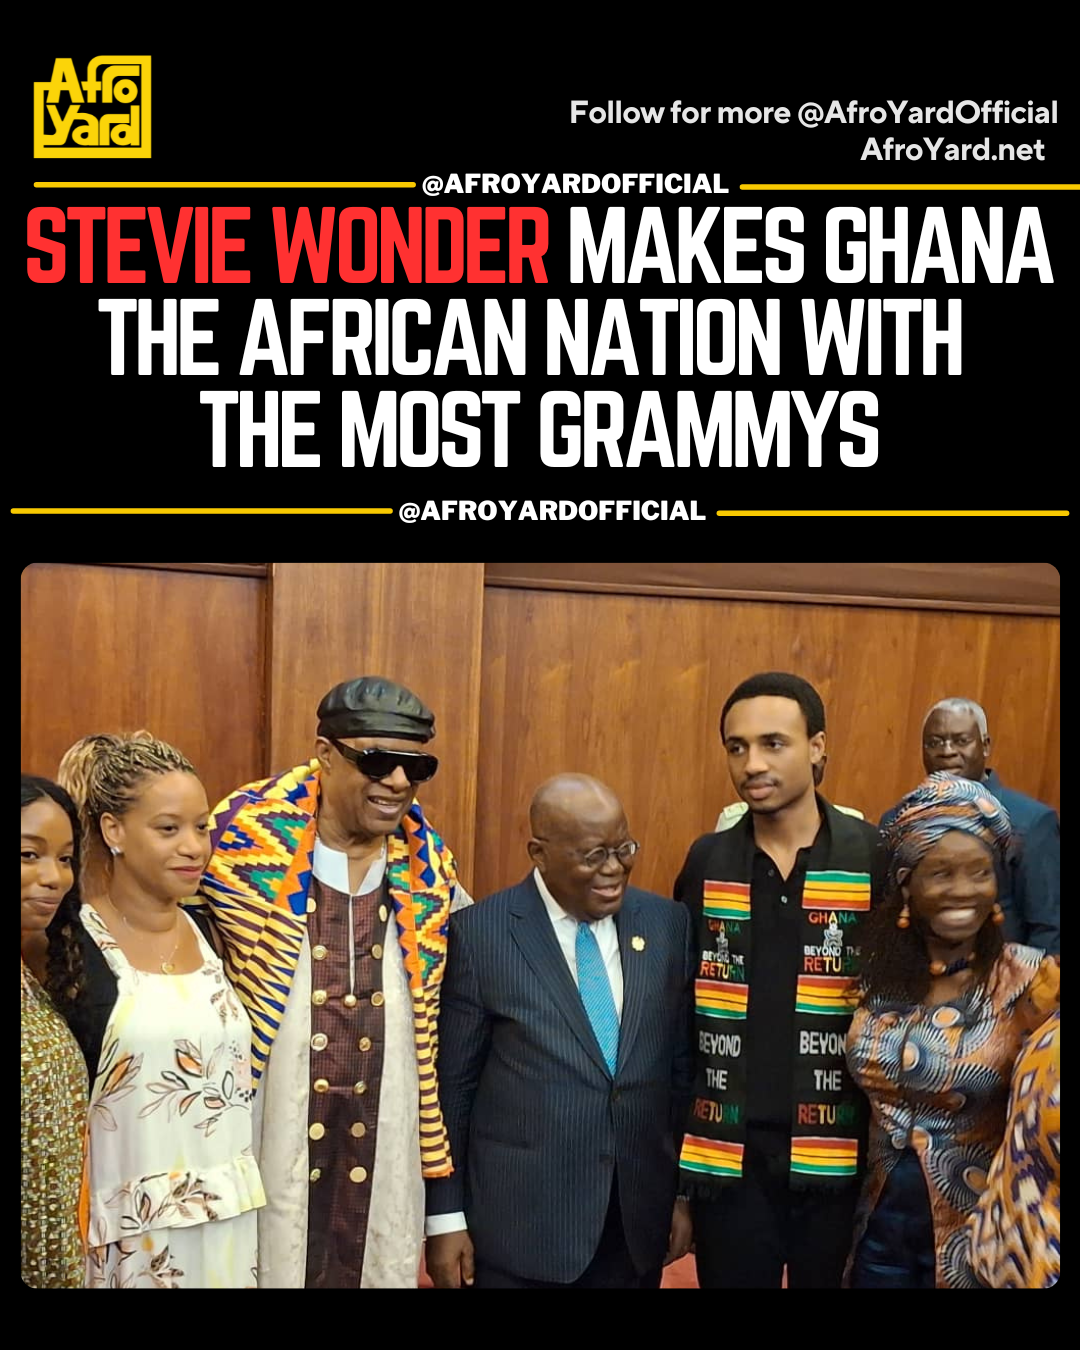 Ghana Becomes the African Country with Highest Grammys after Stevie Wonder Citizenship